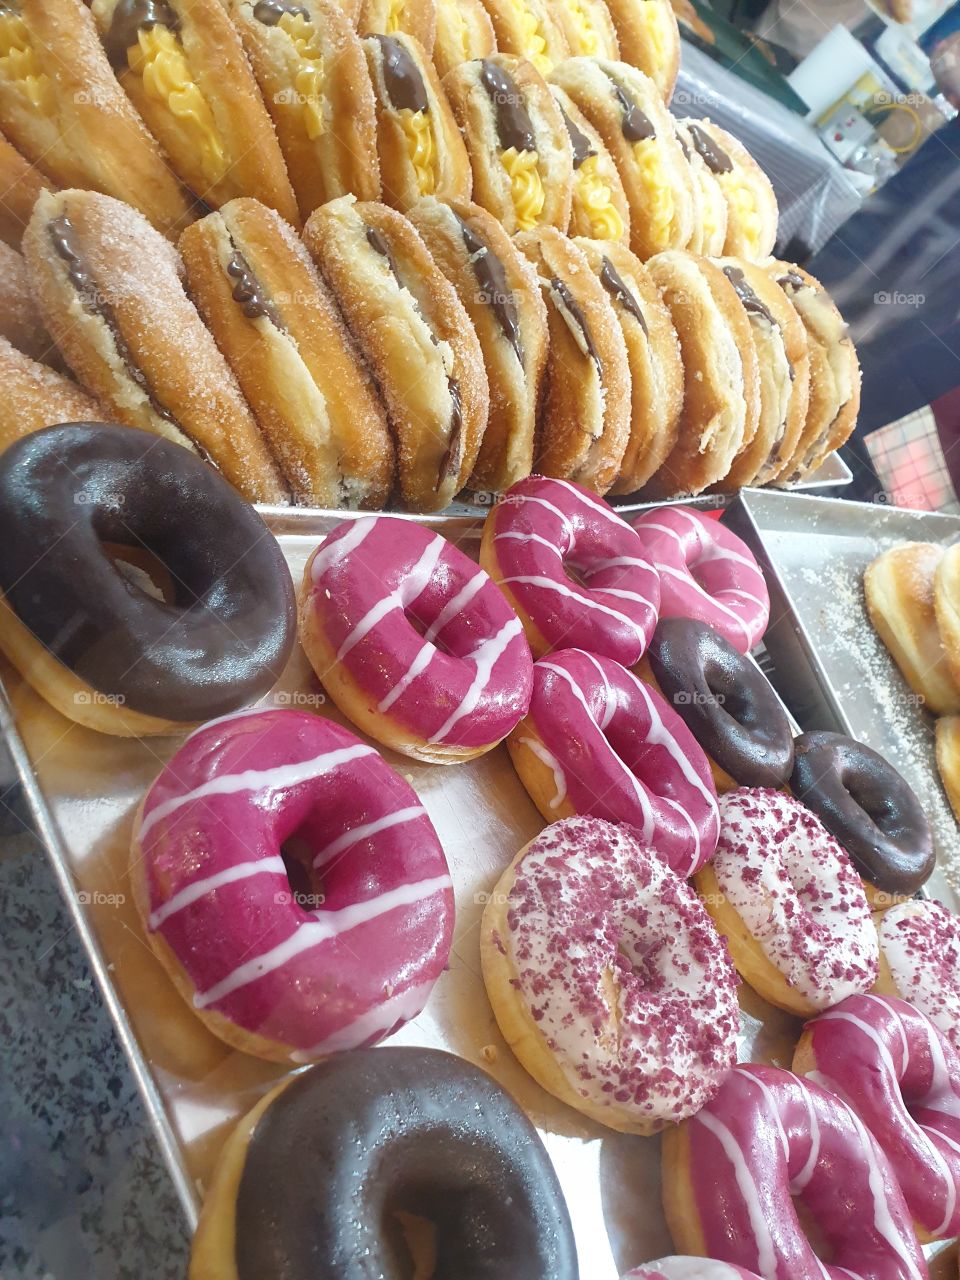 DONUT TIME